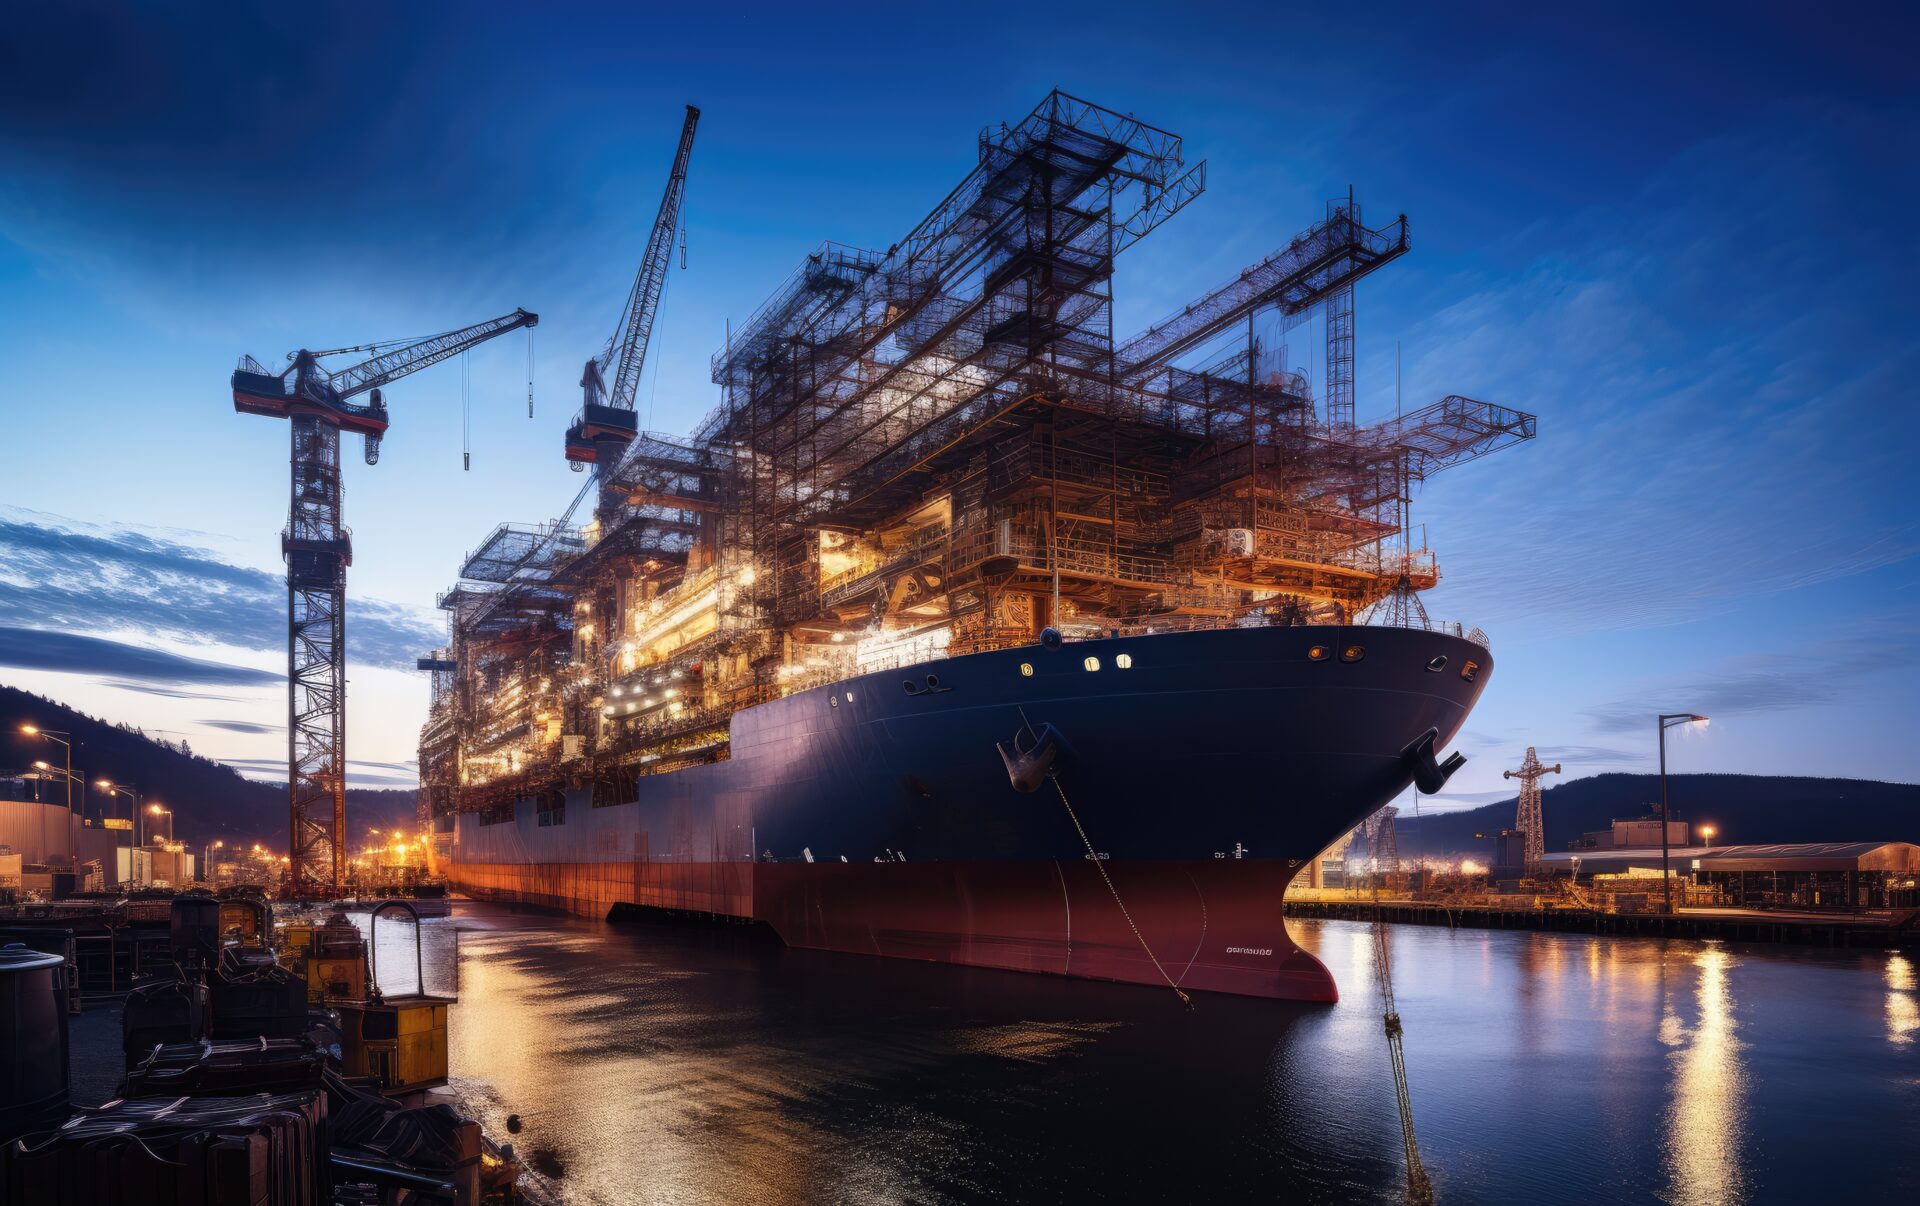 Stunning image of a massive cargo ship being constructed in a dry dock